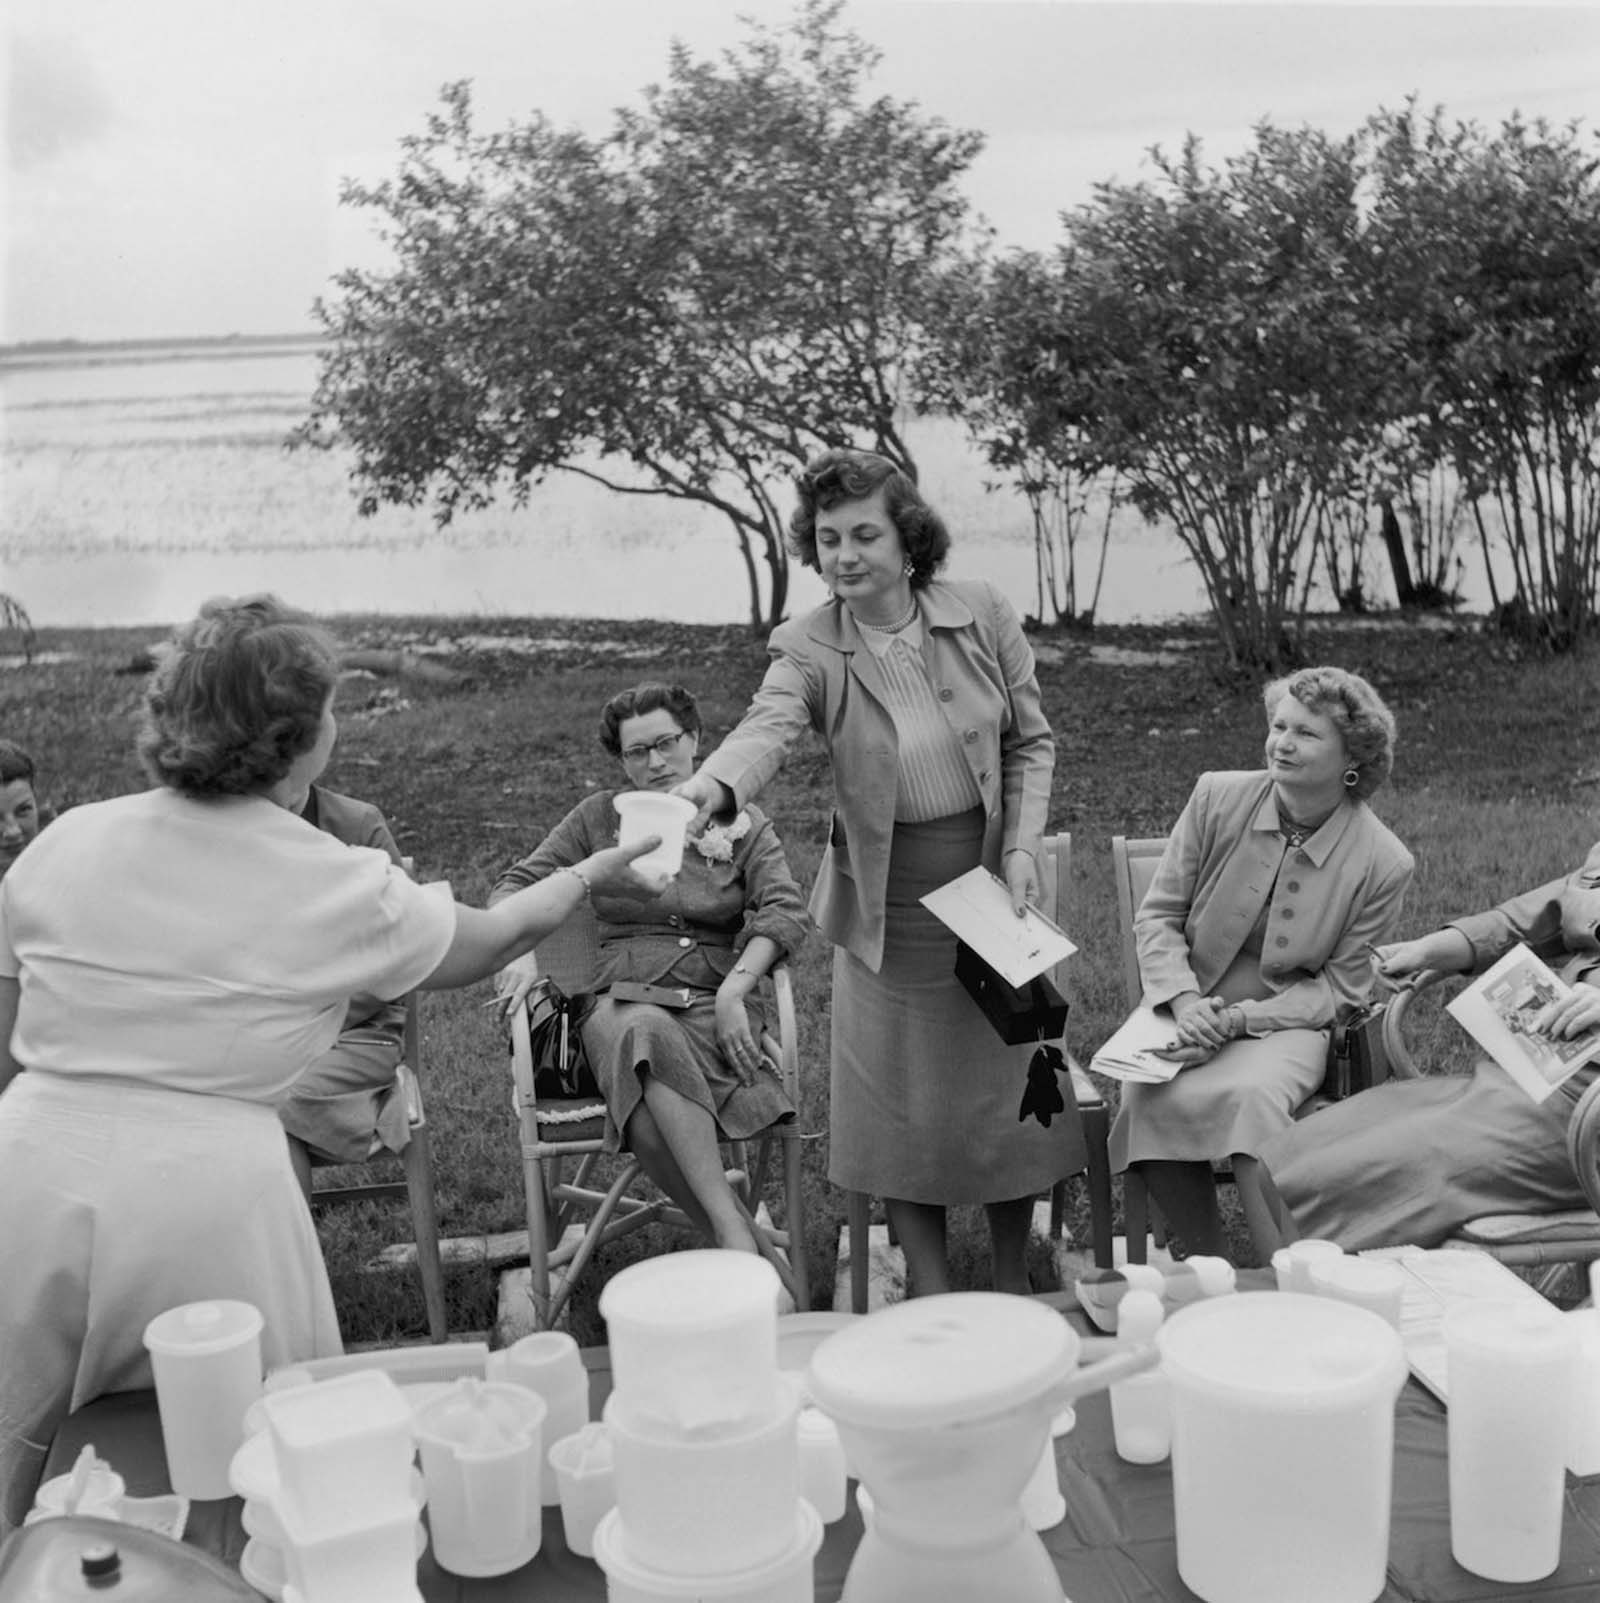 Passing round the product at an outdoor Tupperware. Hosts had a strict dress code – skirts and stockings were mandatory. 1955.